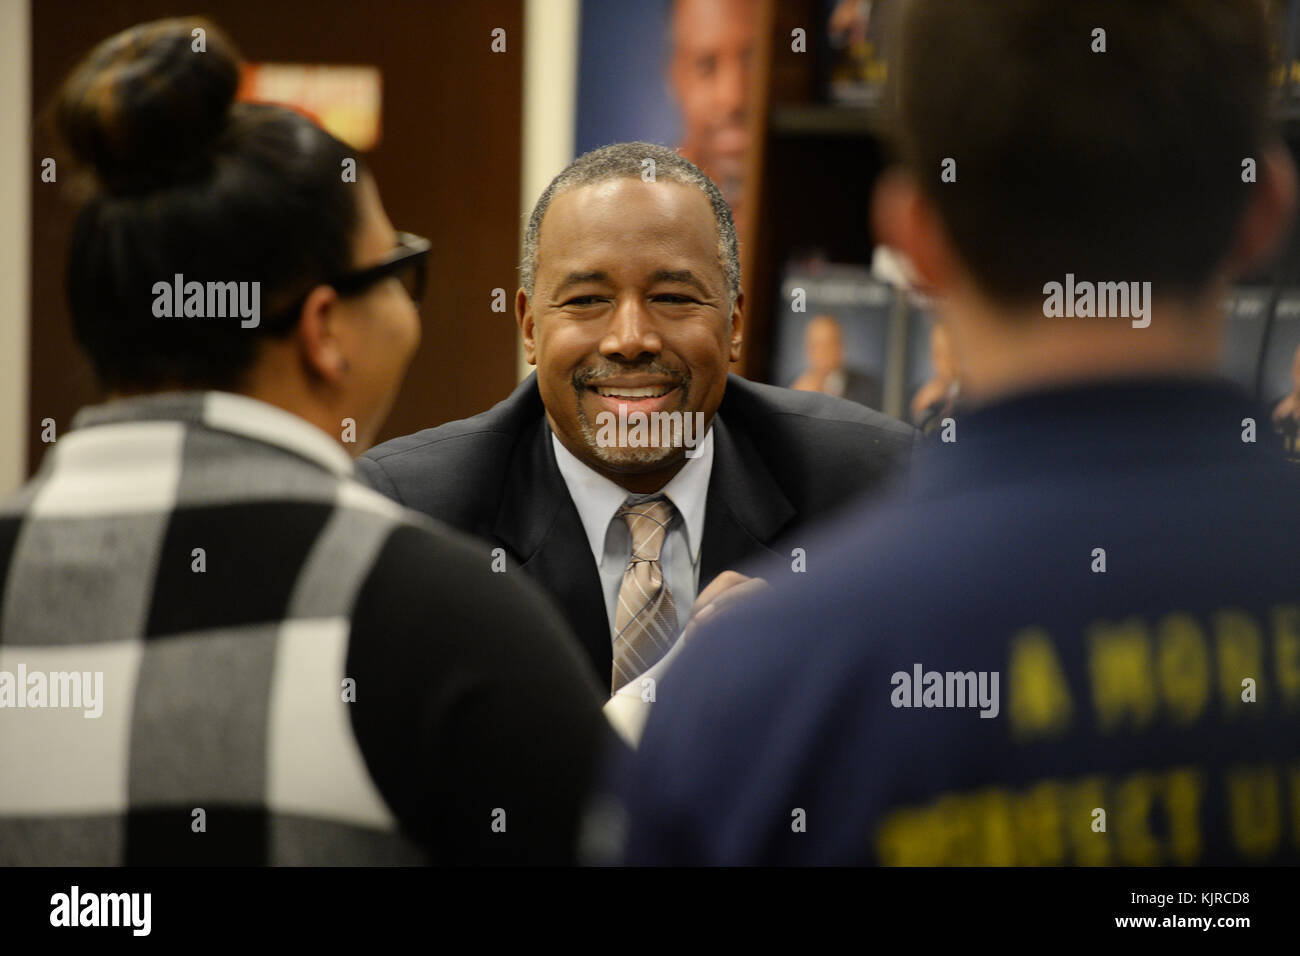 FORT LAUDERDALE FL - NOVEMBER 05: Presidential candidate Dr. Ben Carson attends a book signing at Barnes and Noble where he signed copies of his book 'A More Perfect Union' on November 5, 2015 in Fort Lauderdale, Florida  People:  Dr. Ben Carson Stock Photo